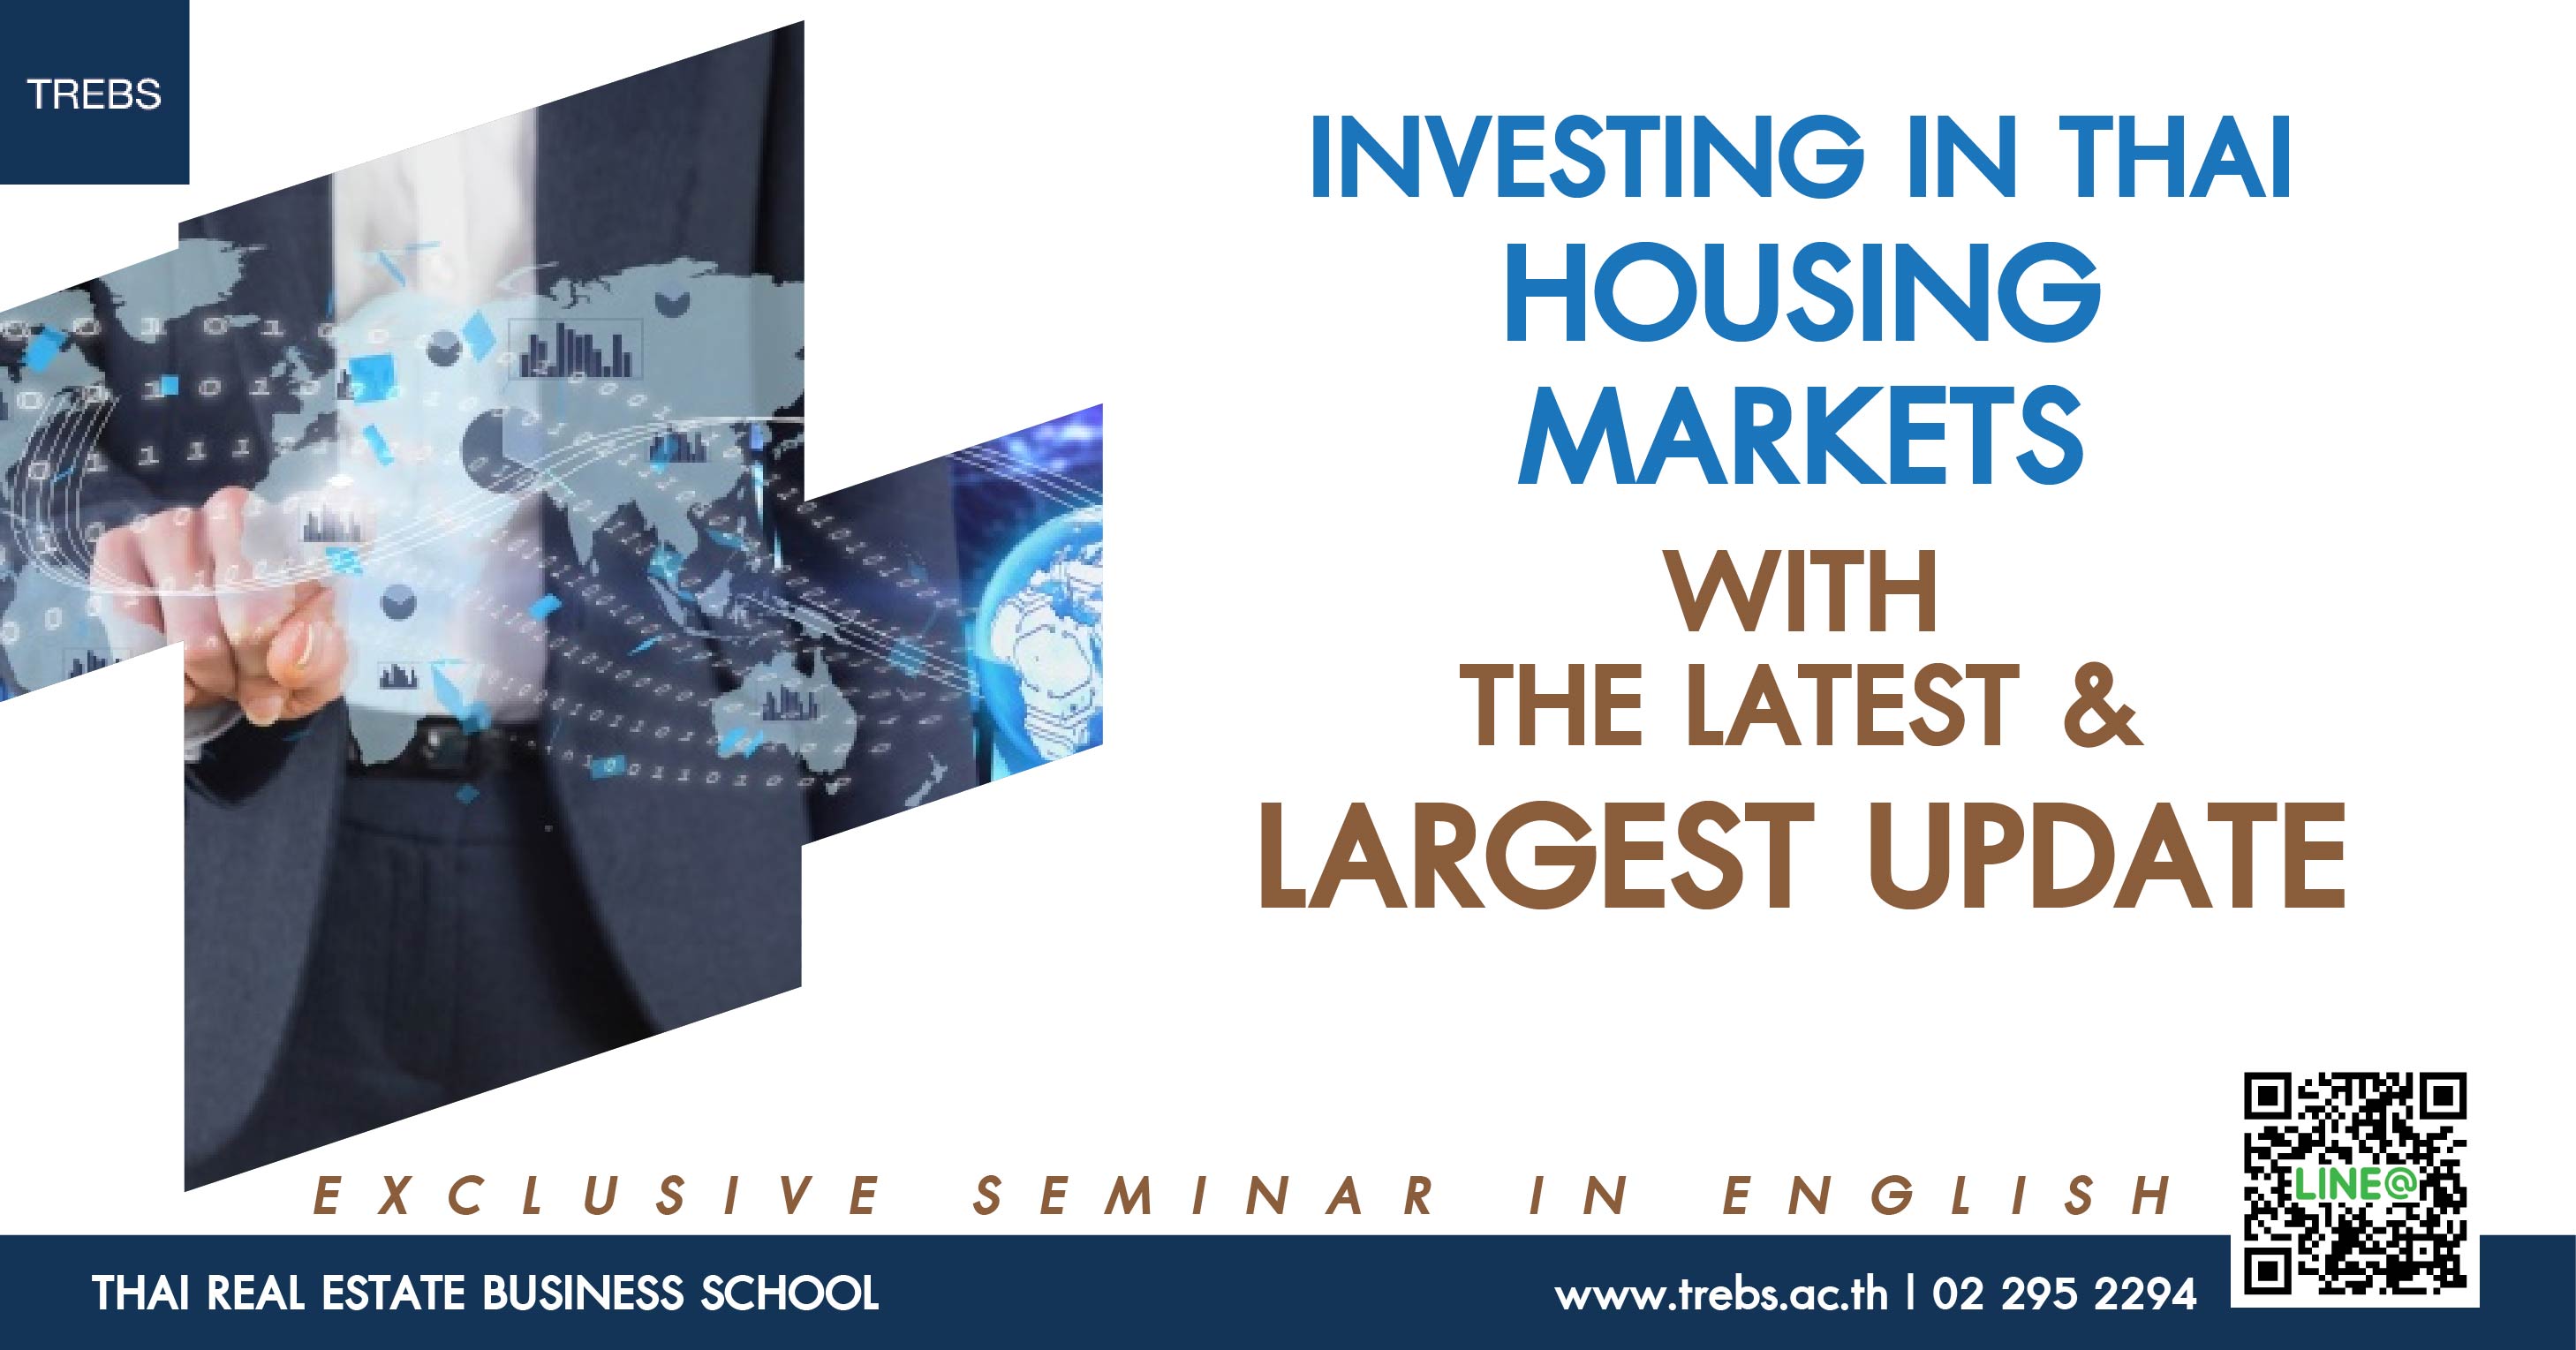 Exclusive Seminar in English : Investing in Thai Housing Markets with the Latest & Largest Update